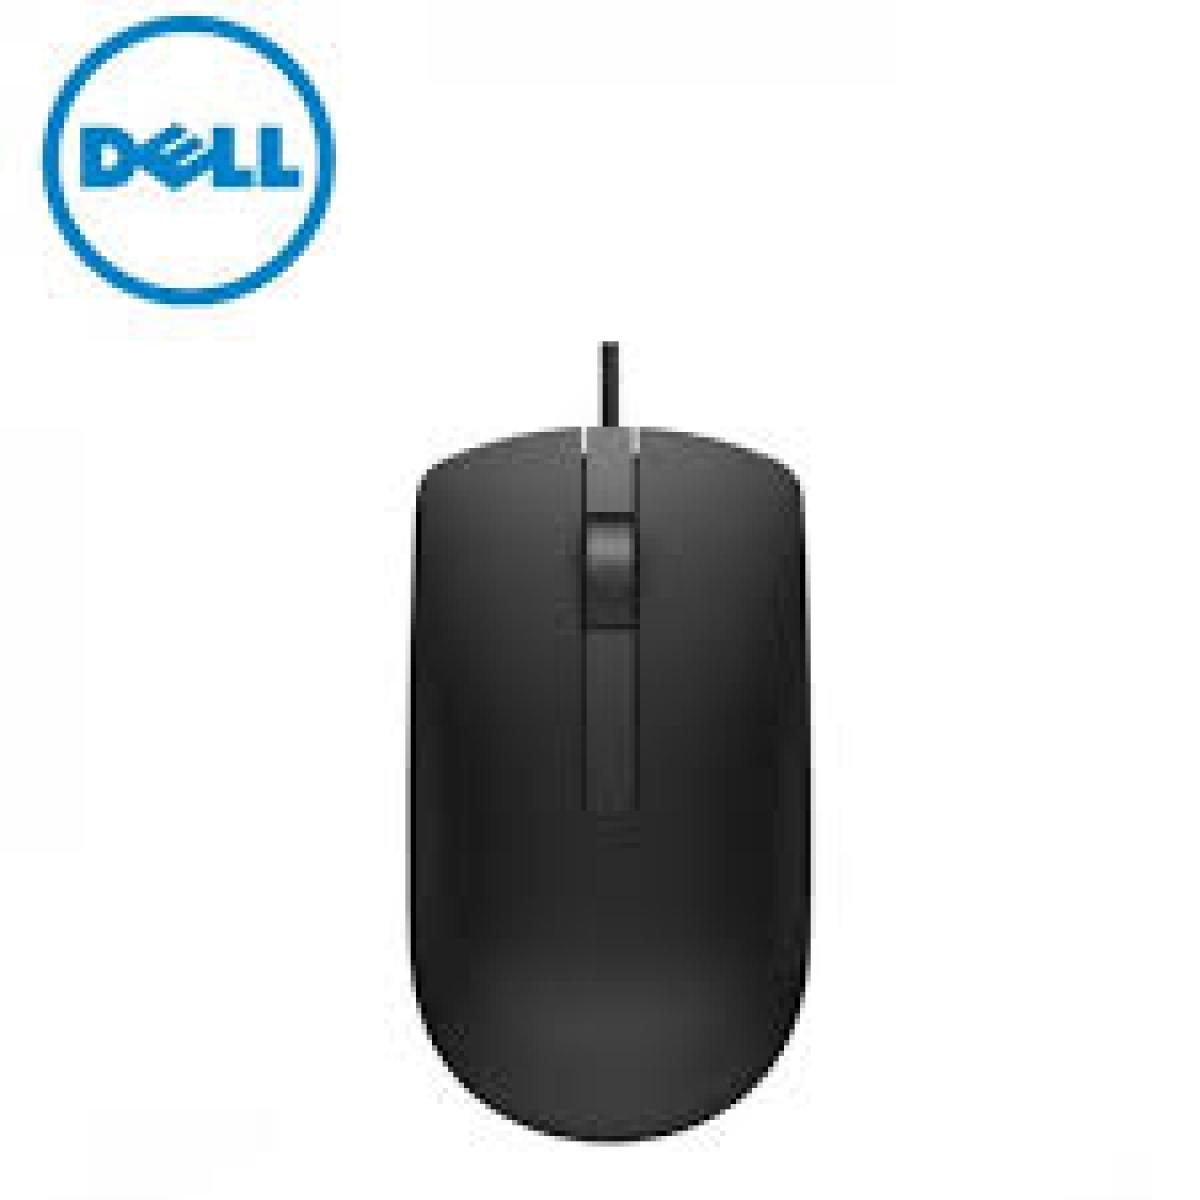 Dell MS116 Optical Mouse (Black) USB WIRED